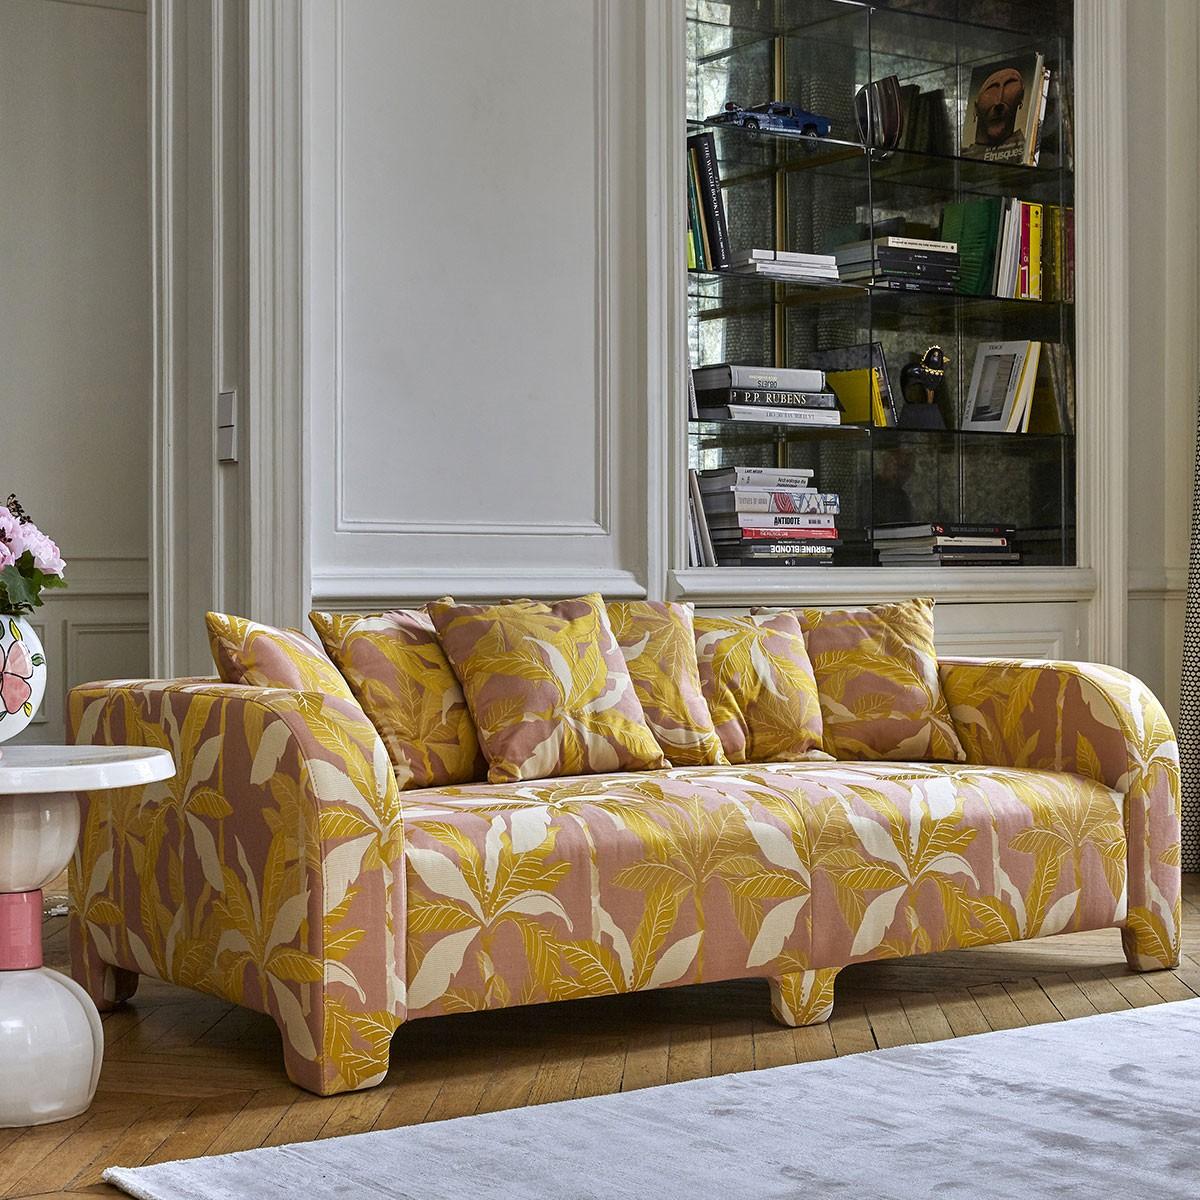 Popus Editions Graziella 2 Seater Sofa in Fuschia London Linen Fabric

A foot that hides another. A cushion that hides another. A curve that hides another with contemporary lines and a base like a punctuation mark, this sofa gives pride of place